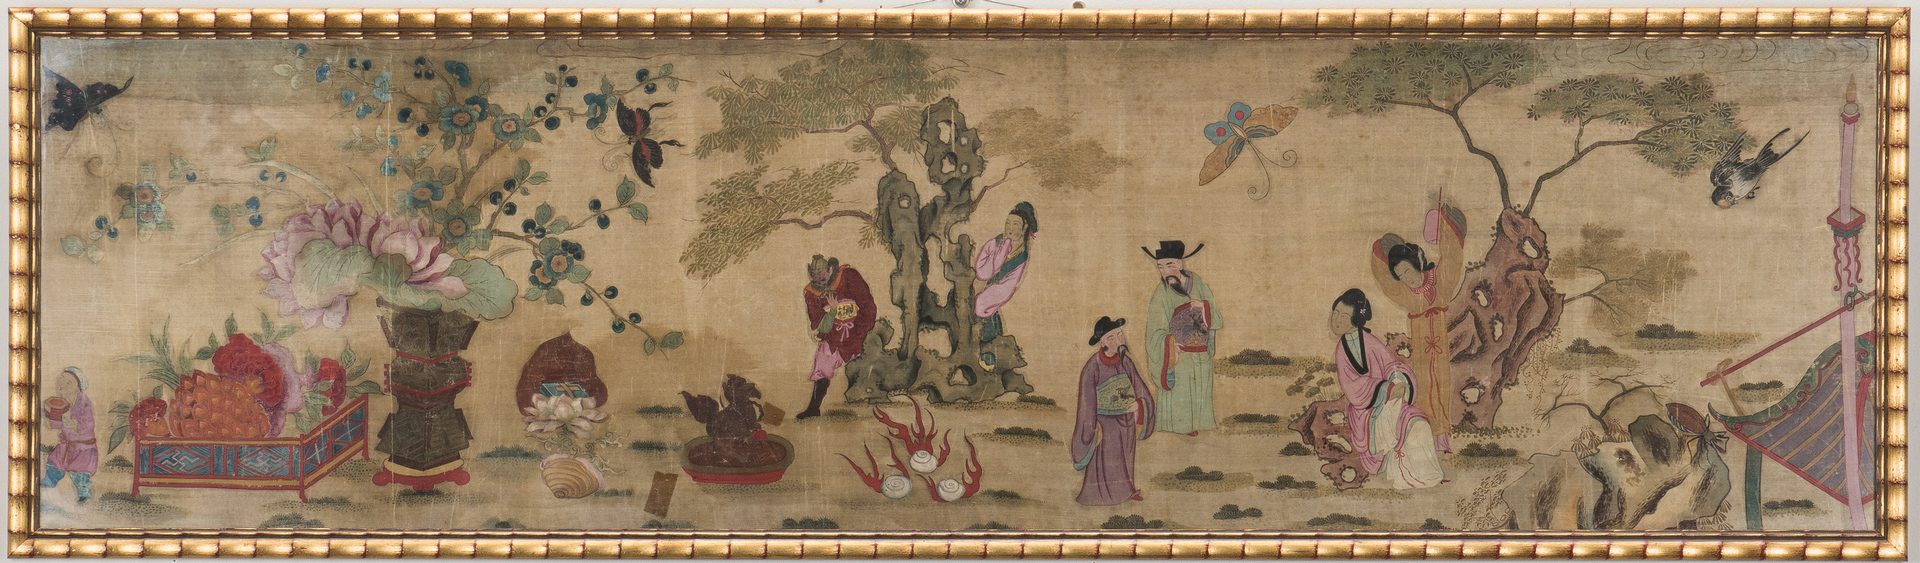 Lot 3: Panoramic Chinese Painting on Silk